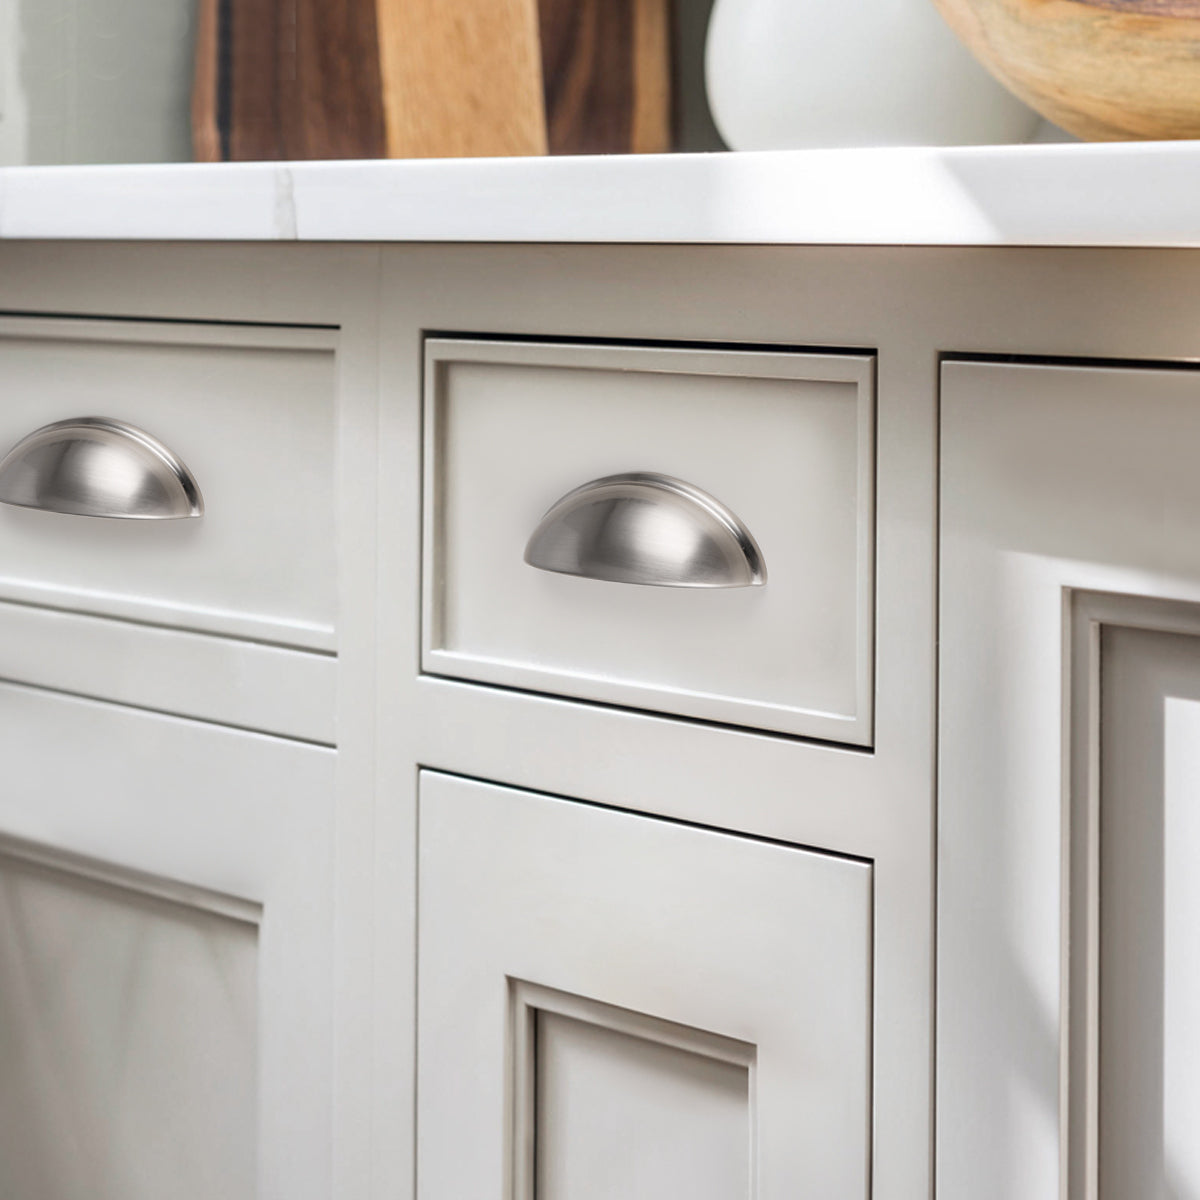 cabinets with cup pulls